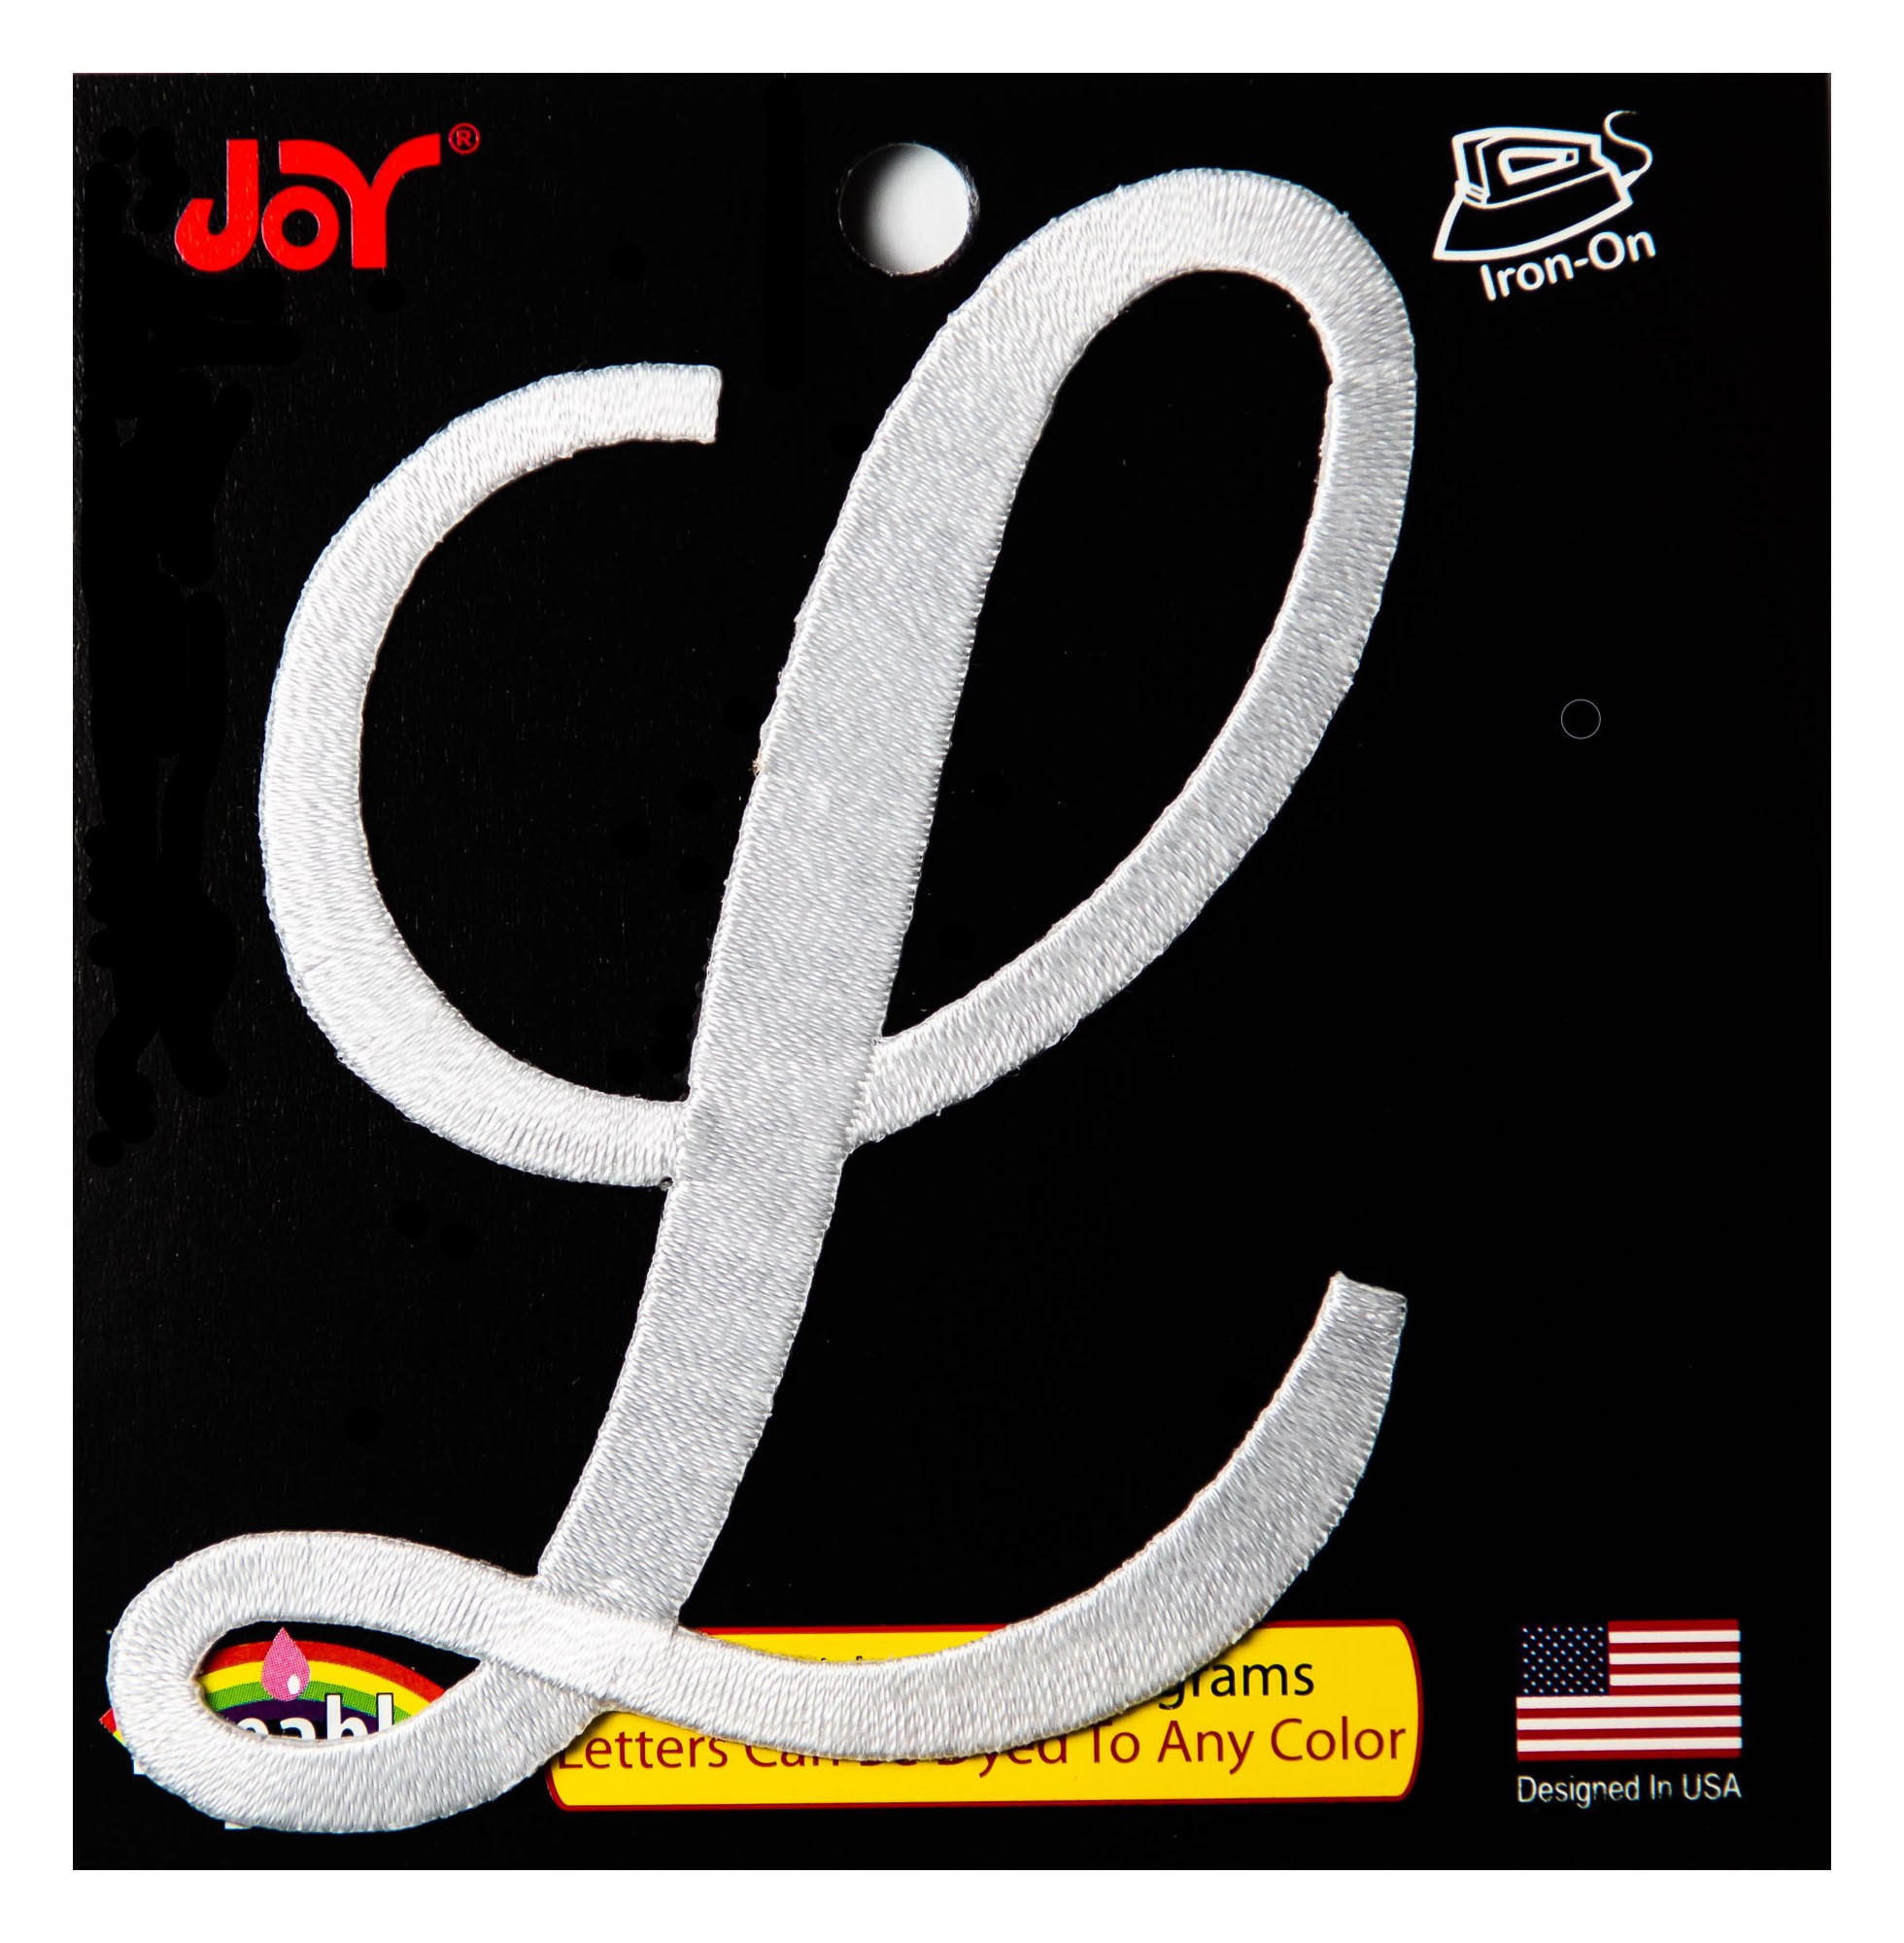 JoySA - The industry leader in embroidered iron-on lettering and  monogramming.